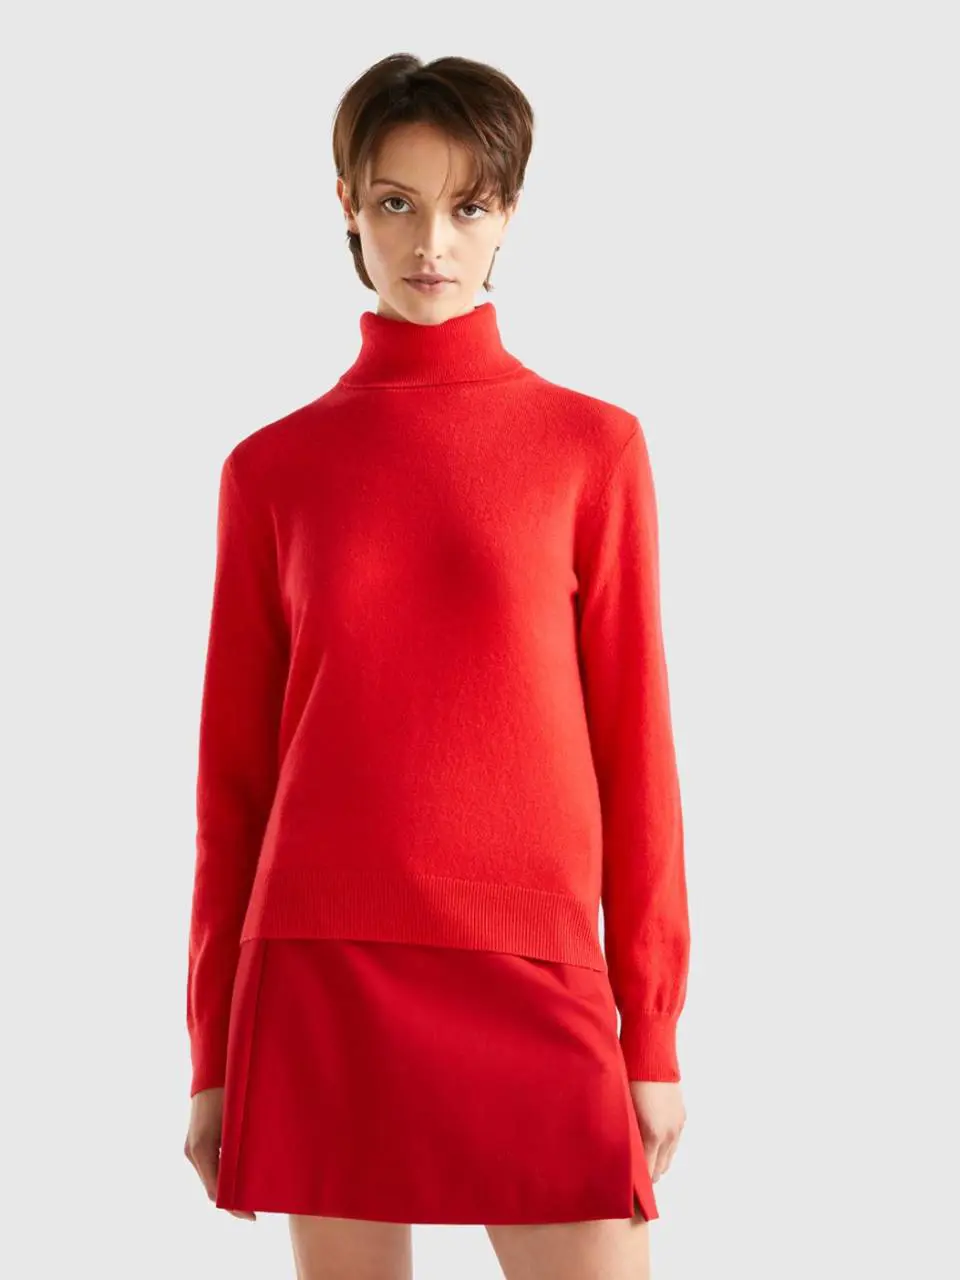 Benetton coral red turtleneck in pure cashmere. 1